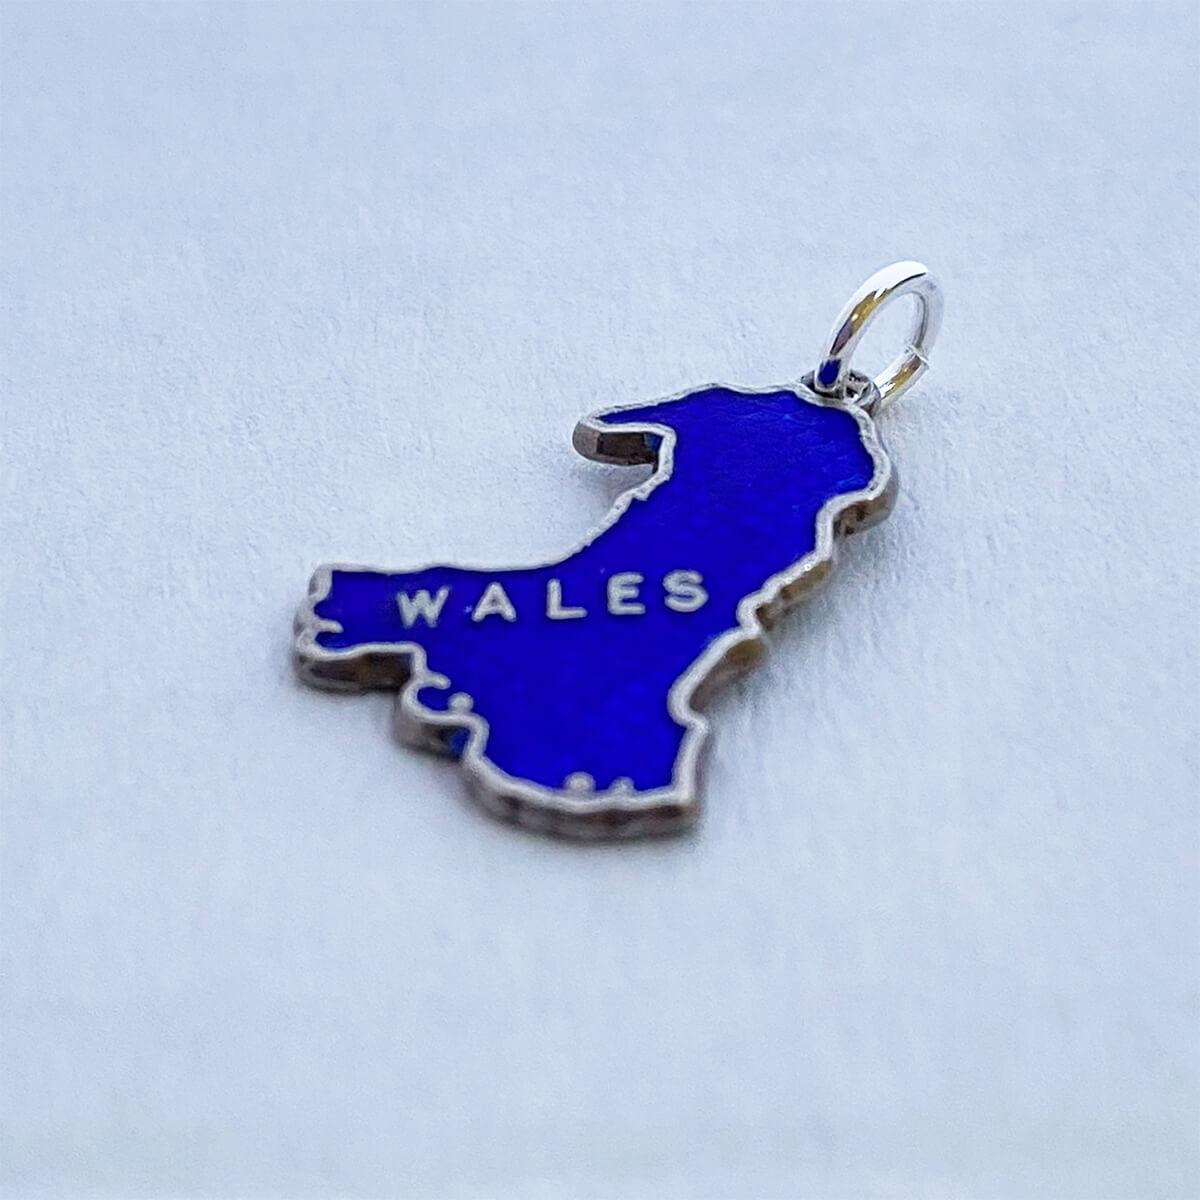 Vintage 1966 map of Wales charm English silver and royal blue enamel